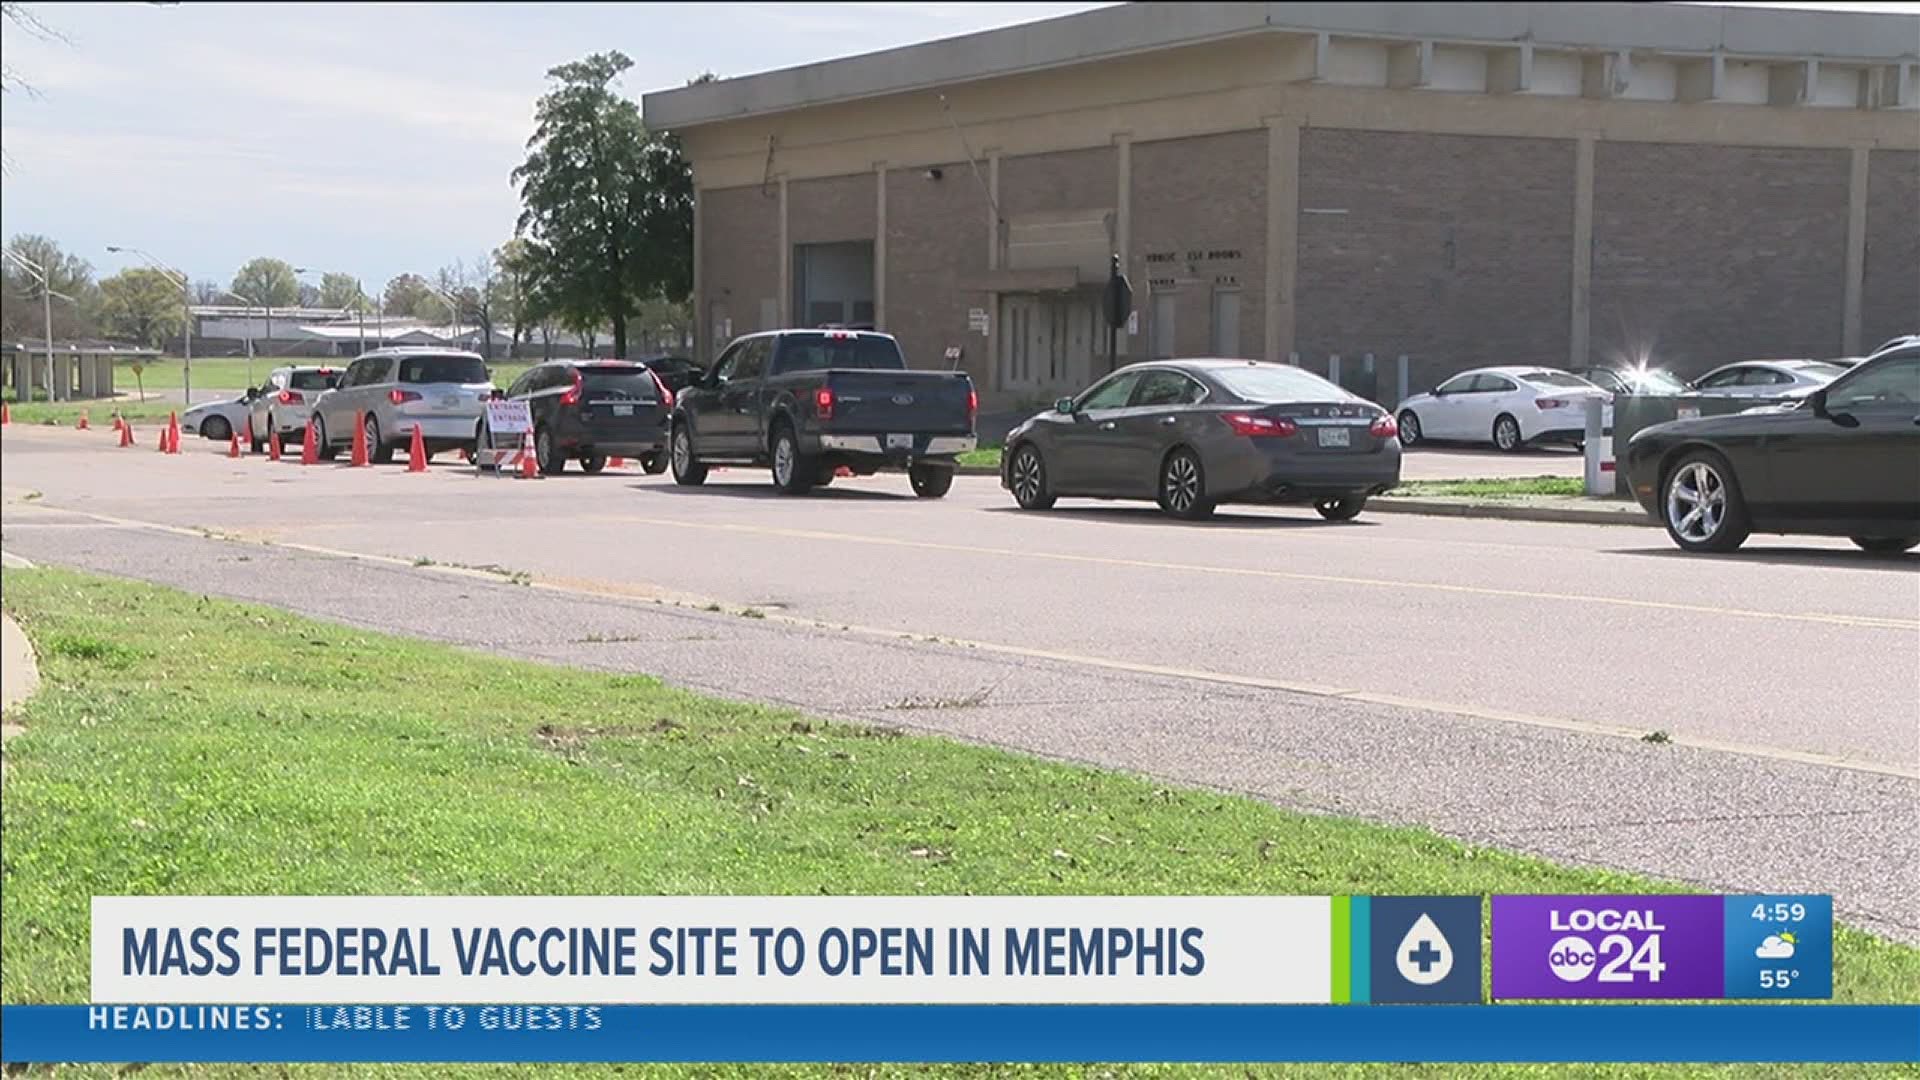 Starting next week, as many as 21,000 additional weekly doses are expected from federal teams at the Pipkin Building in midtown Memphis.